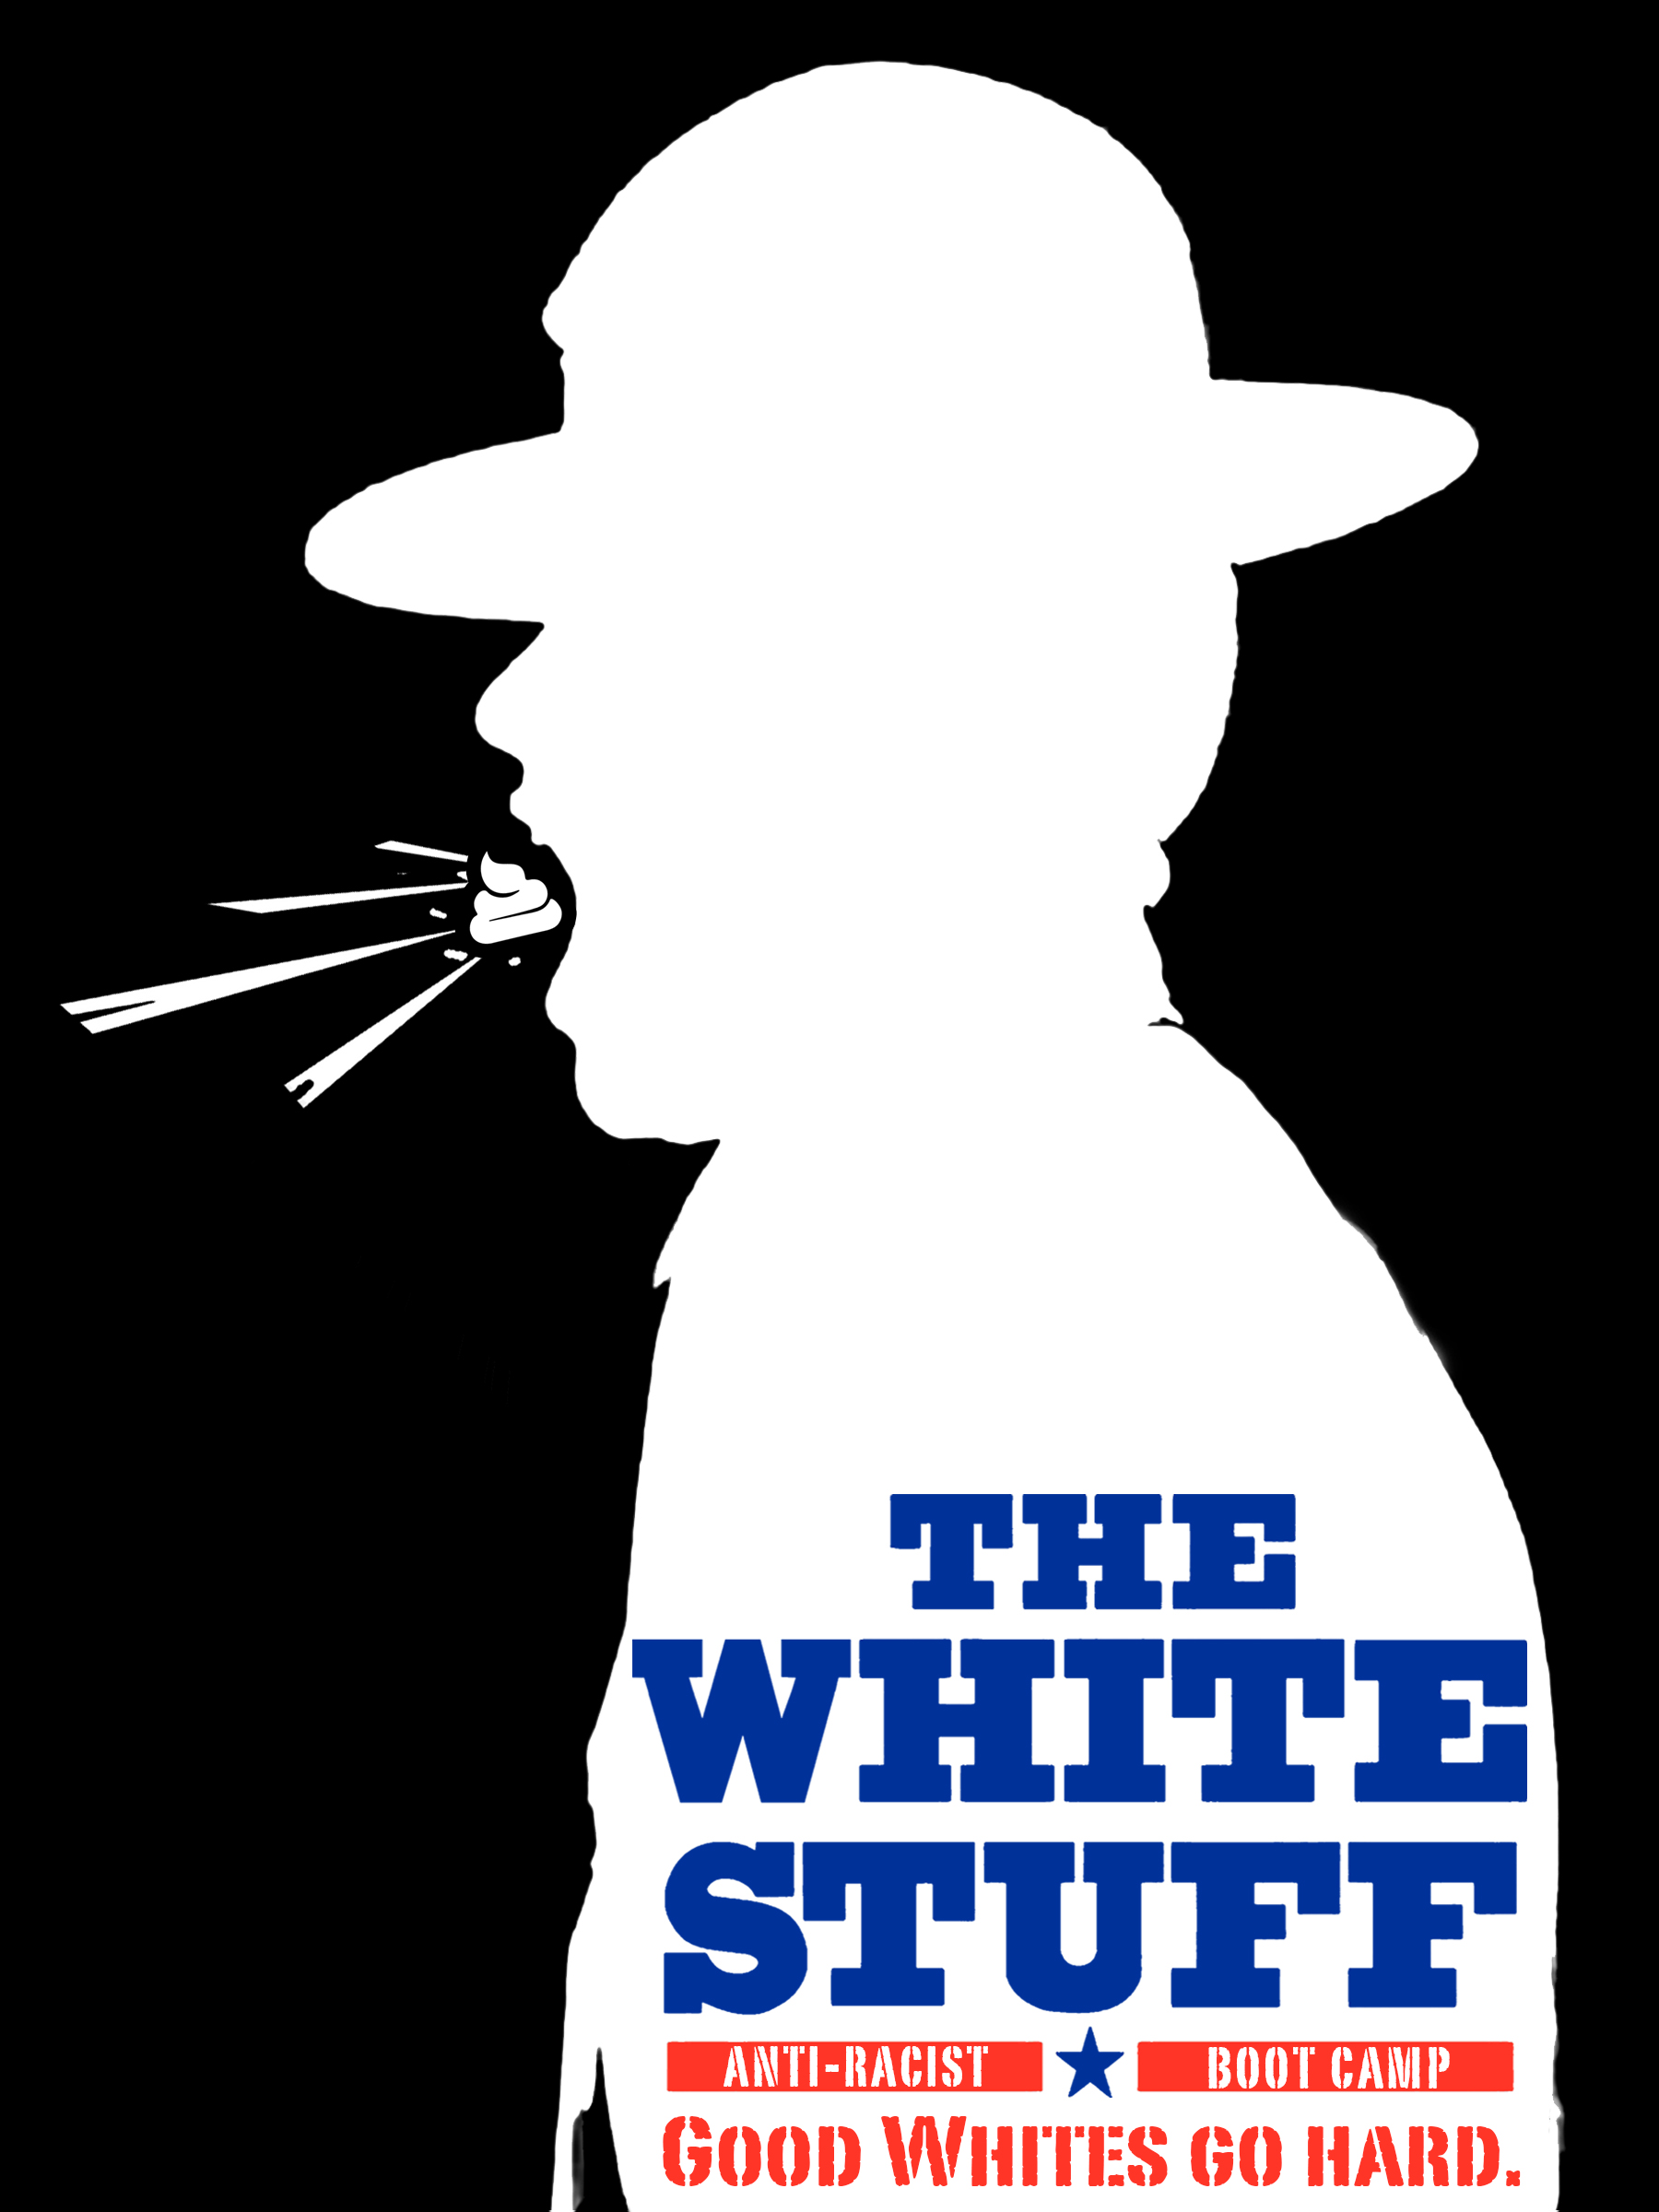 White silhouette of a man in a hat with a swirly turd going into or out of his mouth